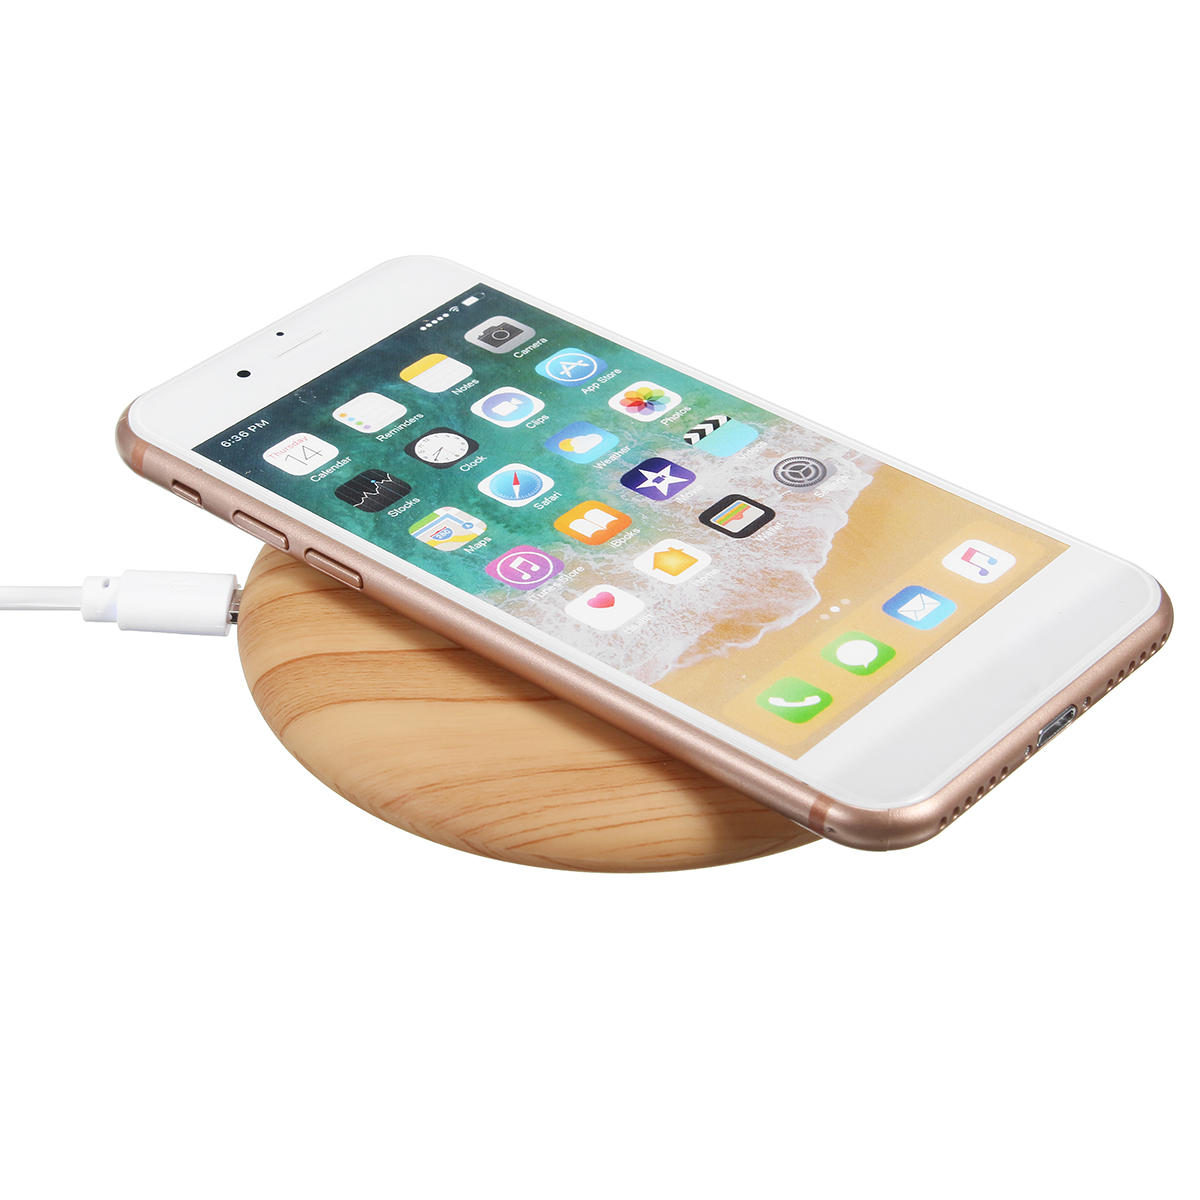 Bakeey 5W QI Wireless Dock Charging Wood Mat Fast Charging Charger For iPhone X 8/8Plus Samsung S8